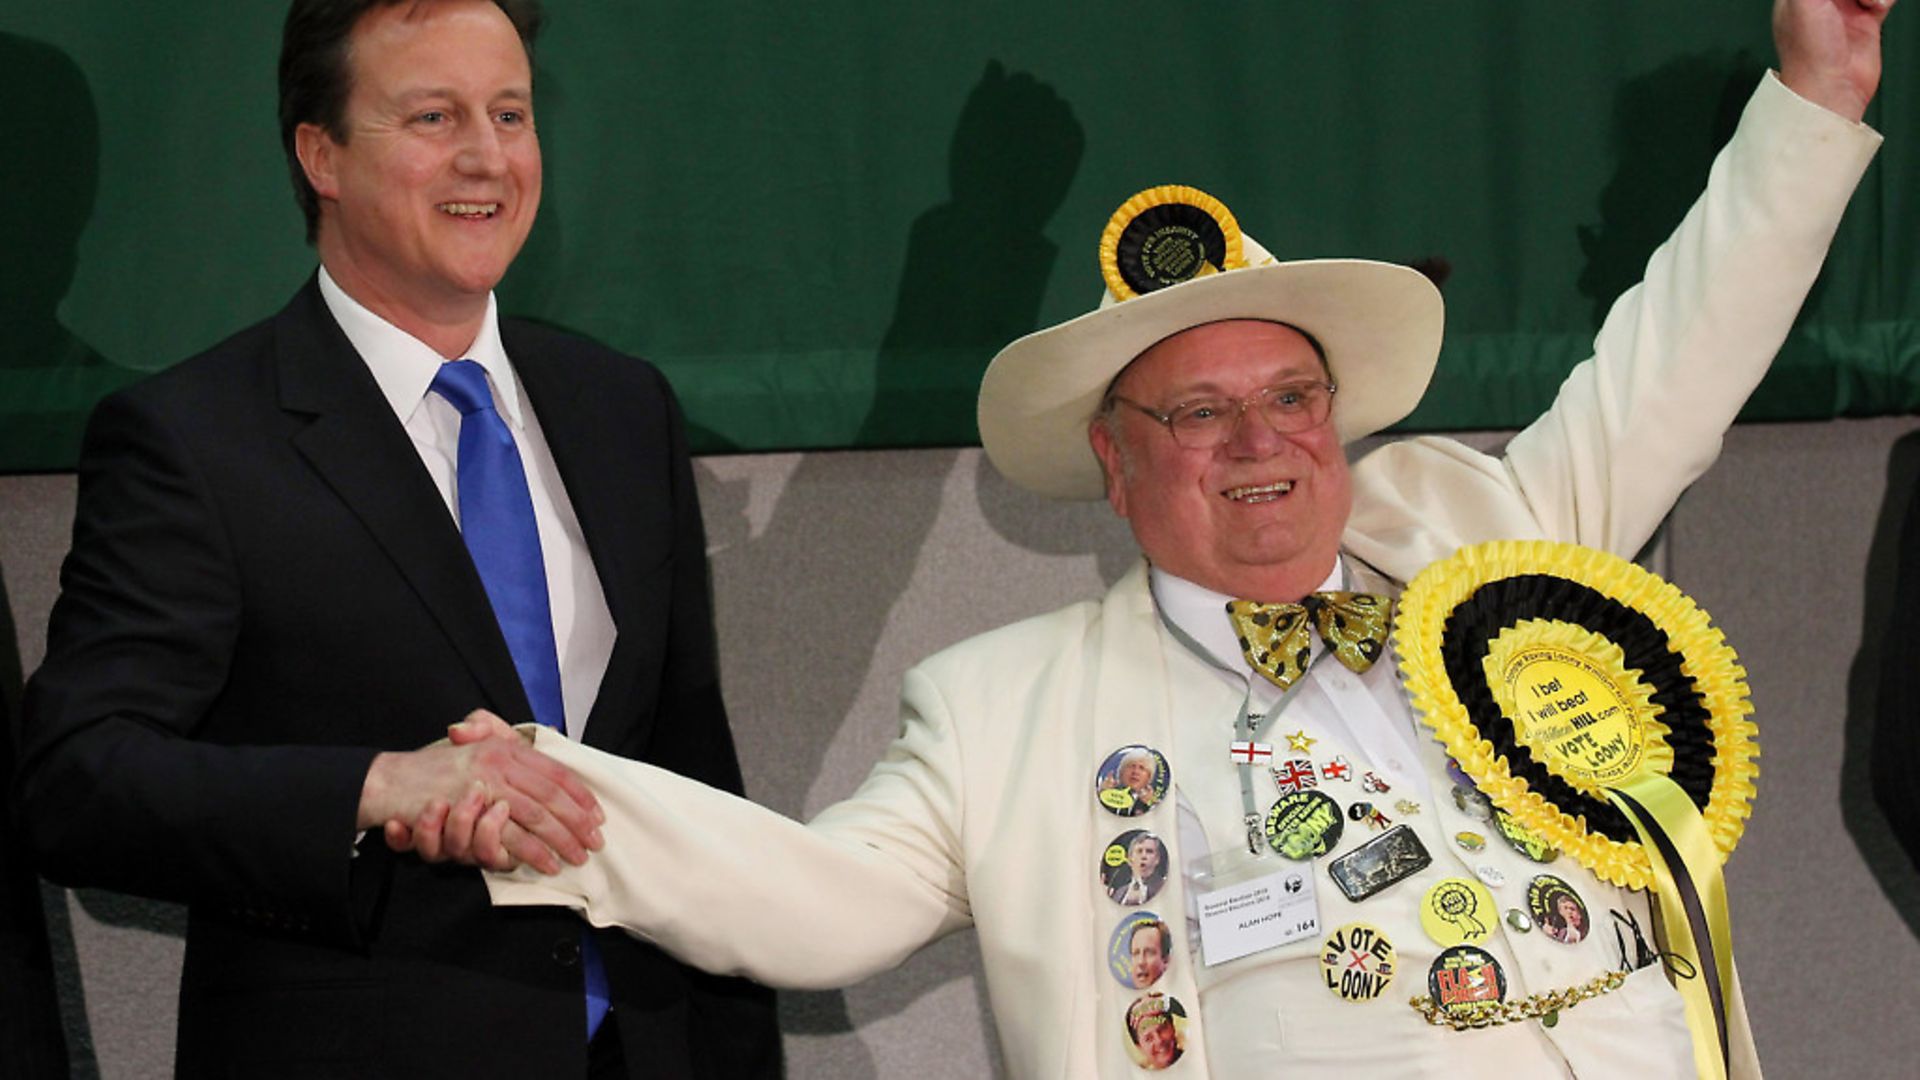 The then Conservative Party leader David Cameron (L) celebrates retaining his parliamentary seat with Monster Raving Loony William Hill Party candidate Alan Hope on May 7, 2010 in Witney.  (Photo by Peter Macdiarmid/Getty Images) - Credit: Getty Images